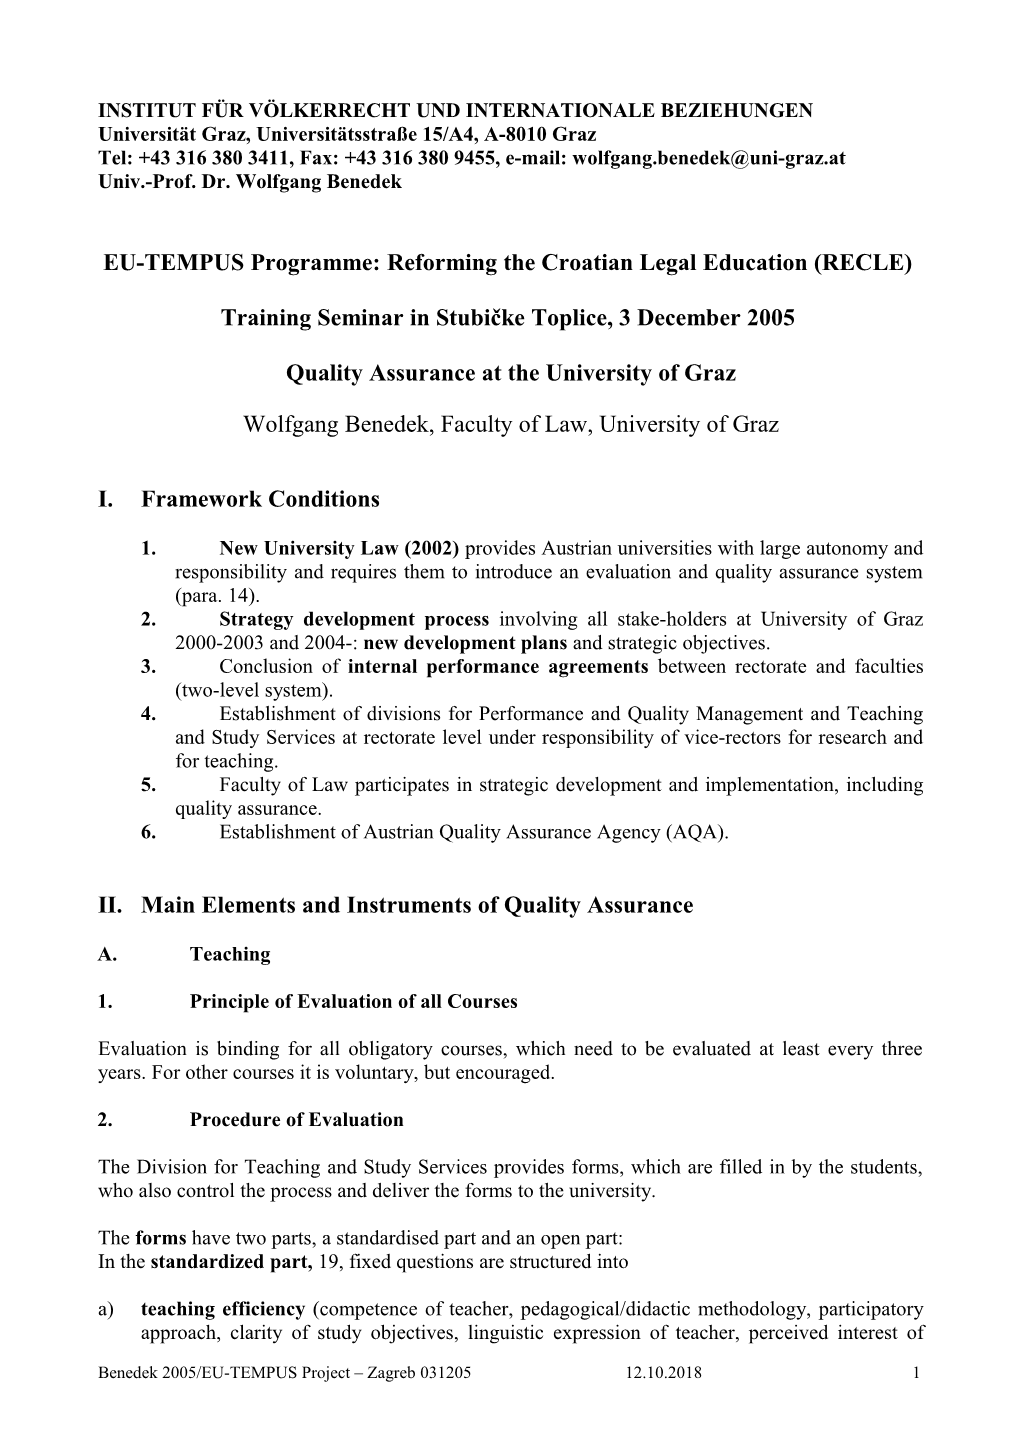 EU-TEMPUS Project: Reform of the Law Faculty Curriculum